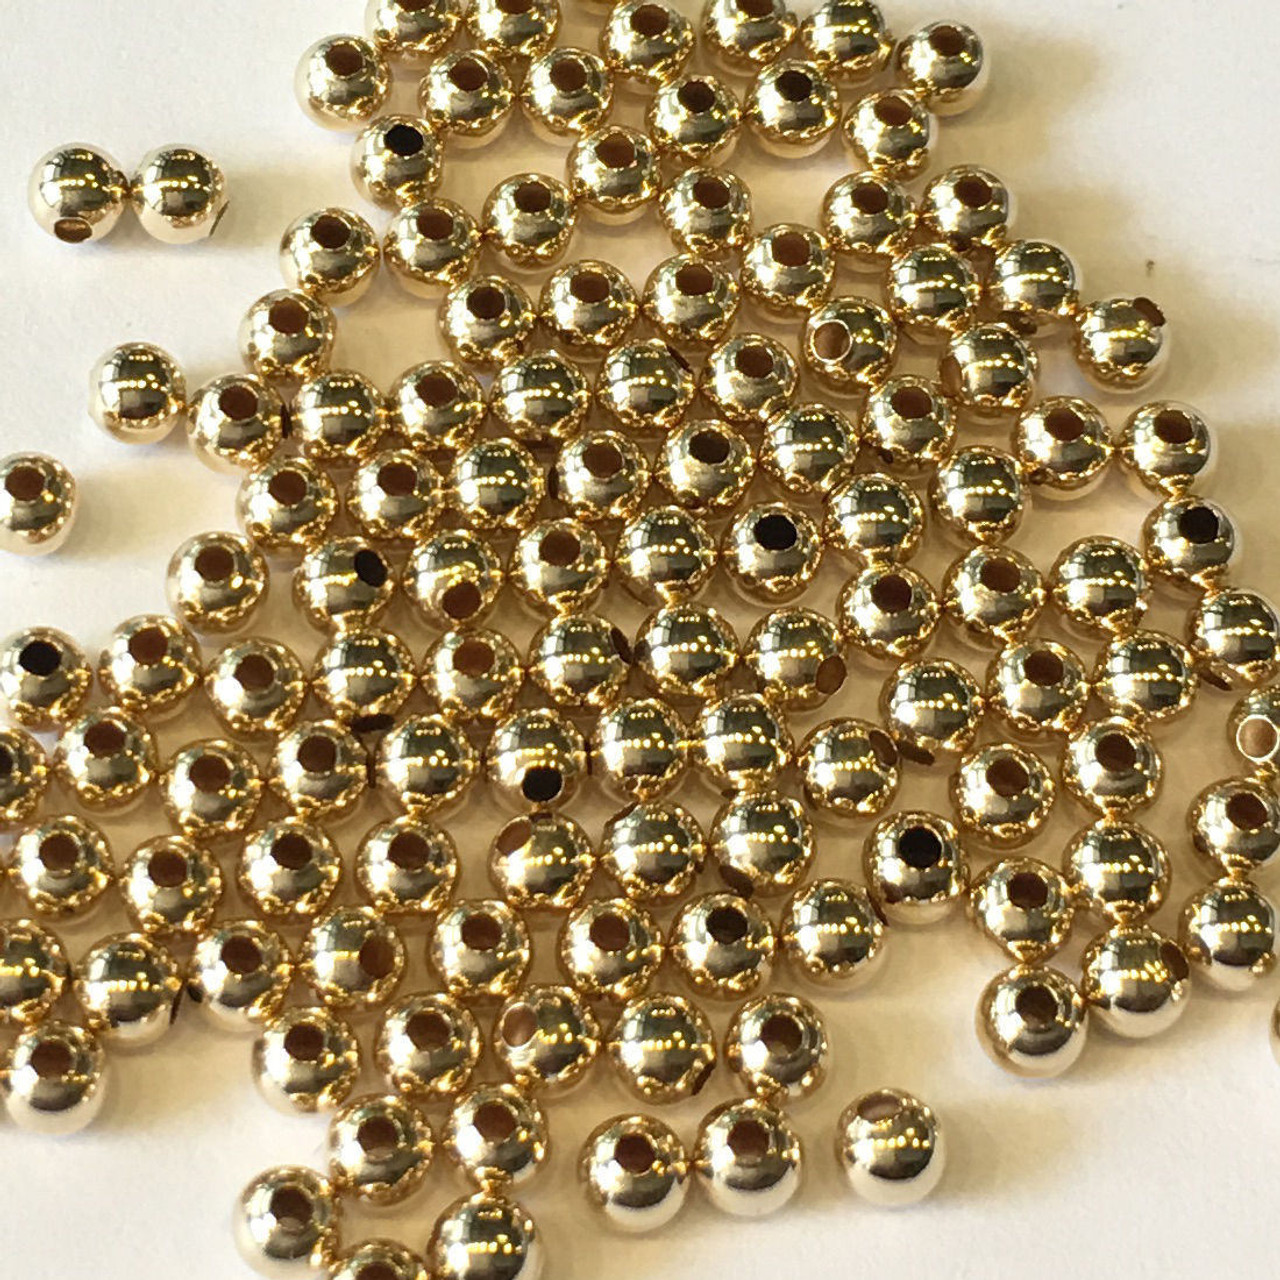 6mm Smooth Round Beads, 14K Gold Filled (10 Pieces)